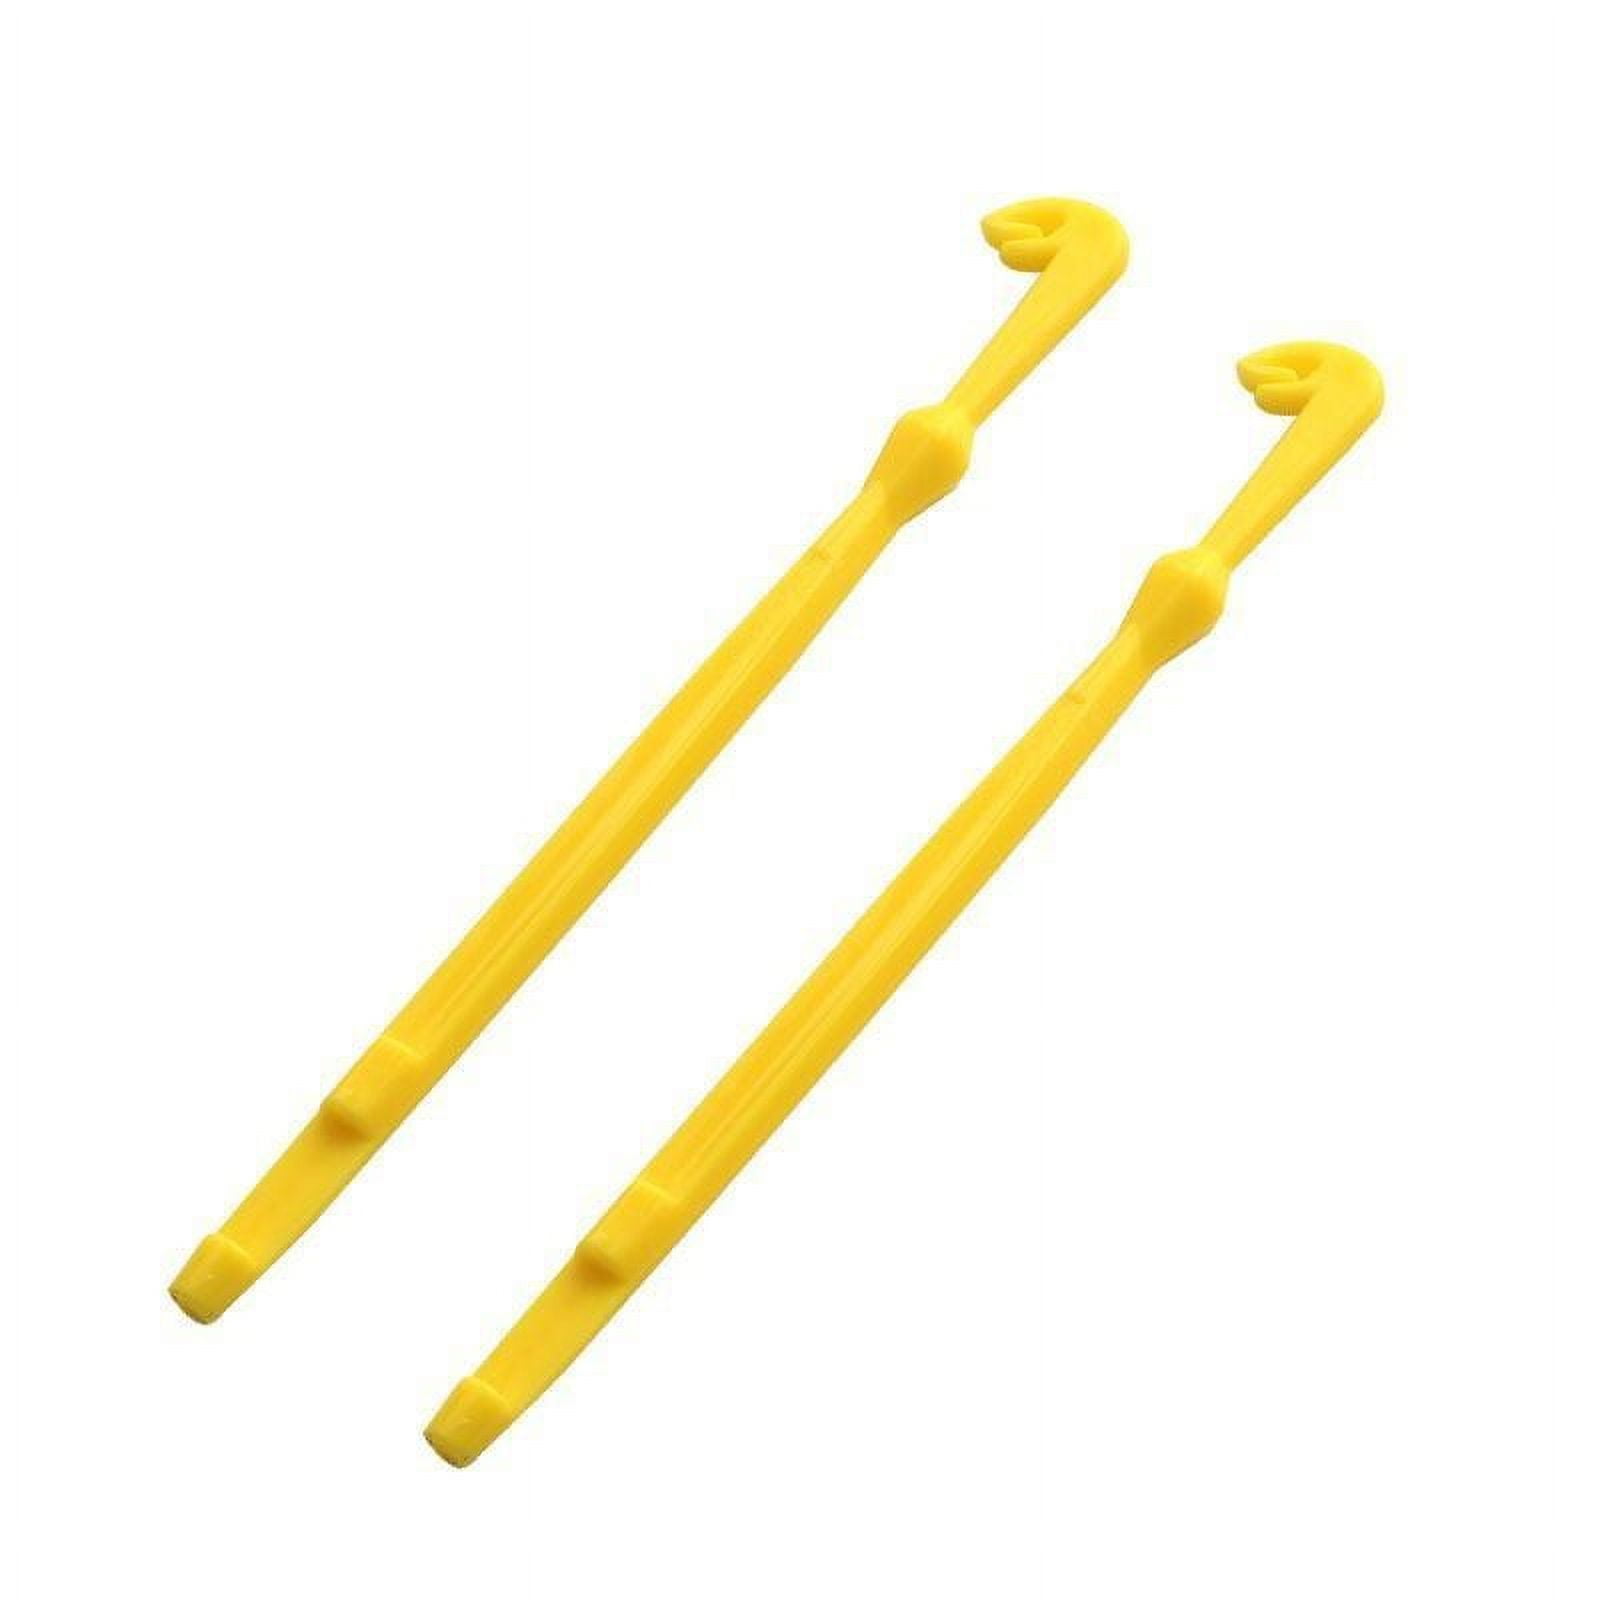 Uxcell Plastic Fishing Hook Bonnets Treble Hook Covers Fit for 1/0,2/0,  Fluorescent Yellow 100 Pack